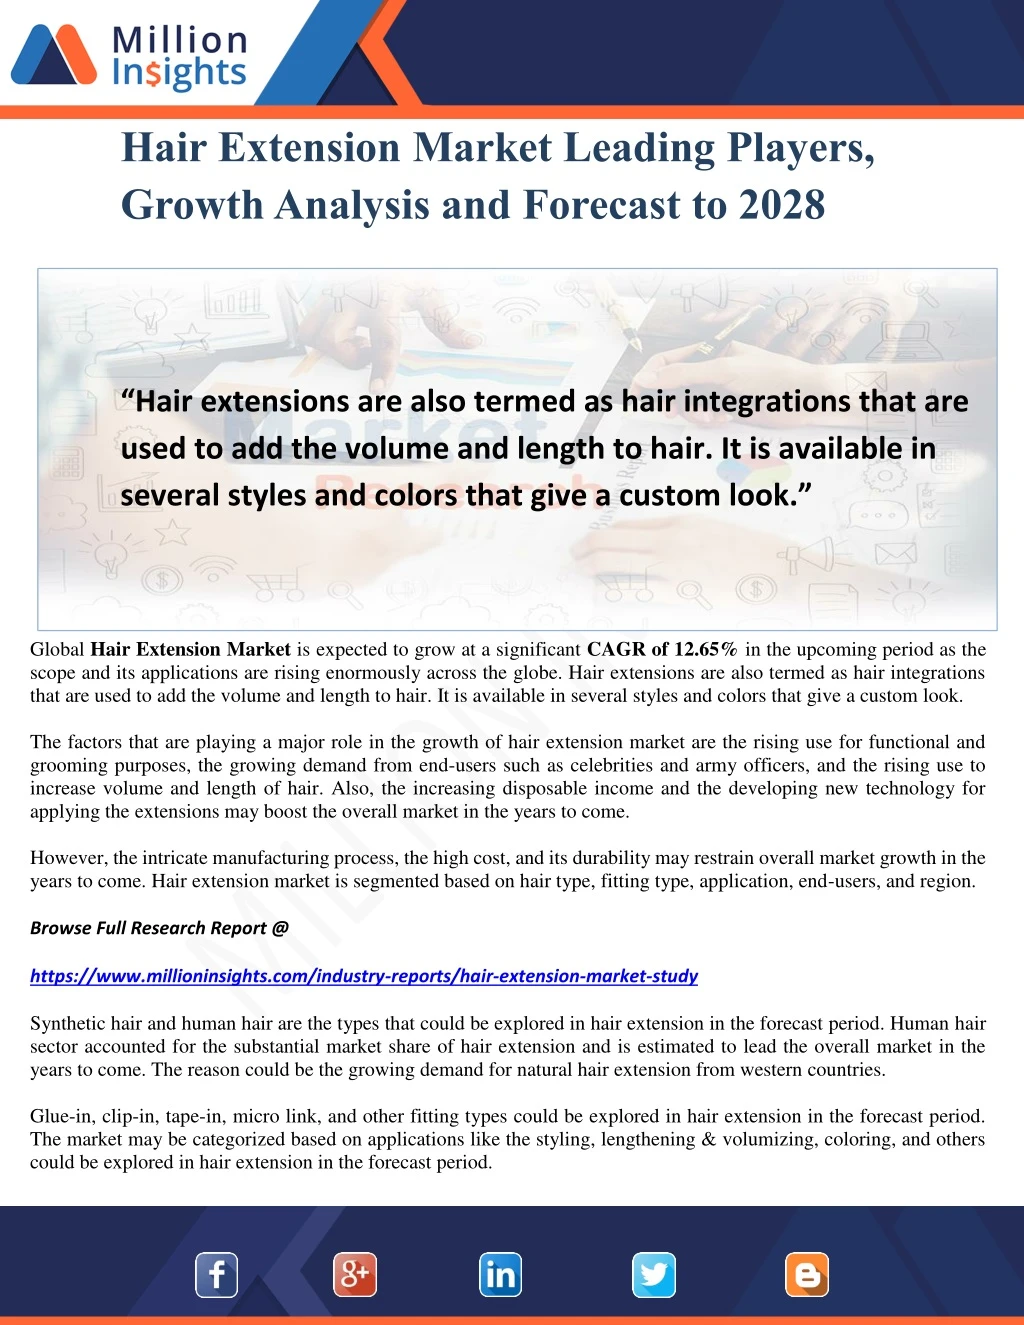 hair extension market leading players growth